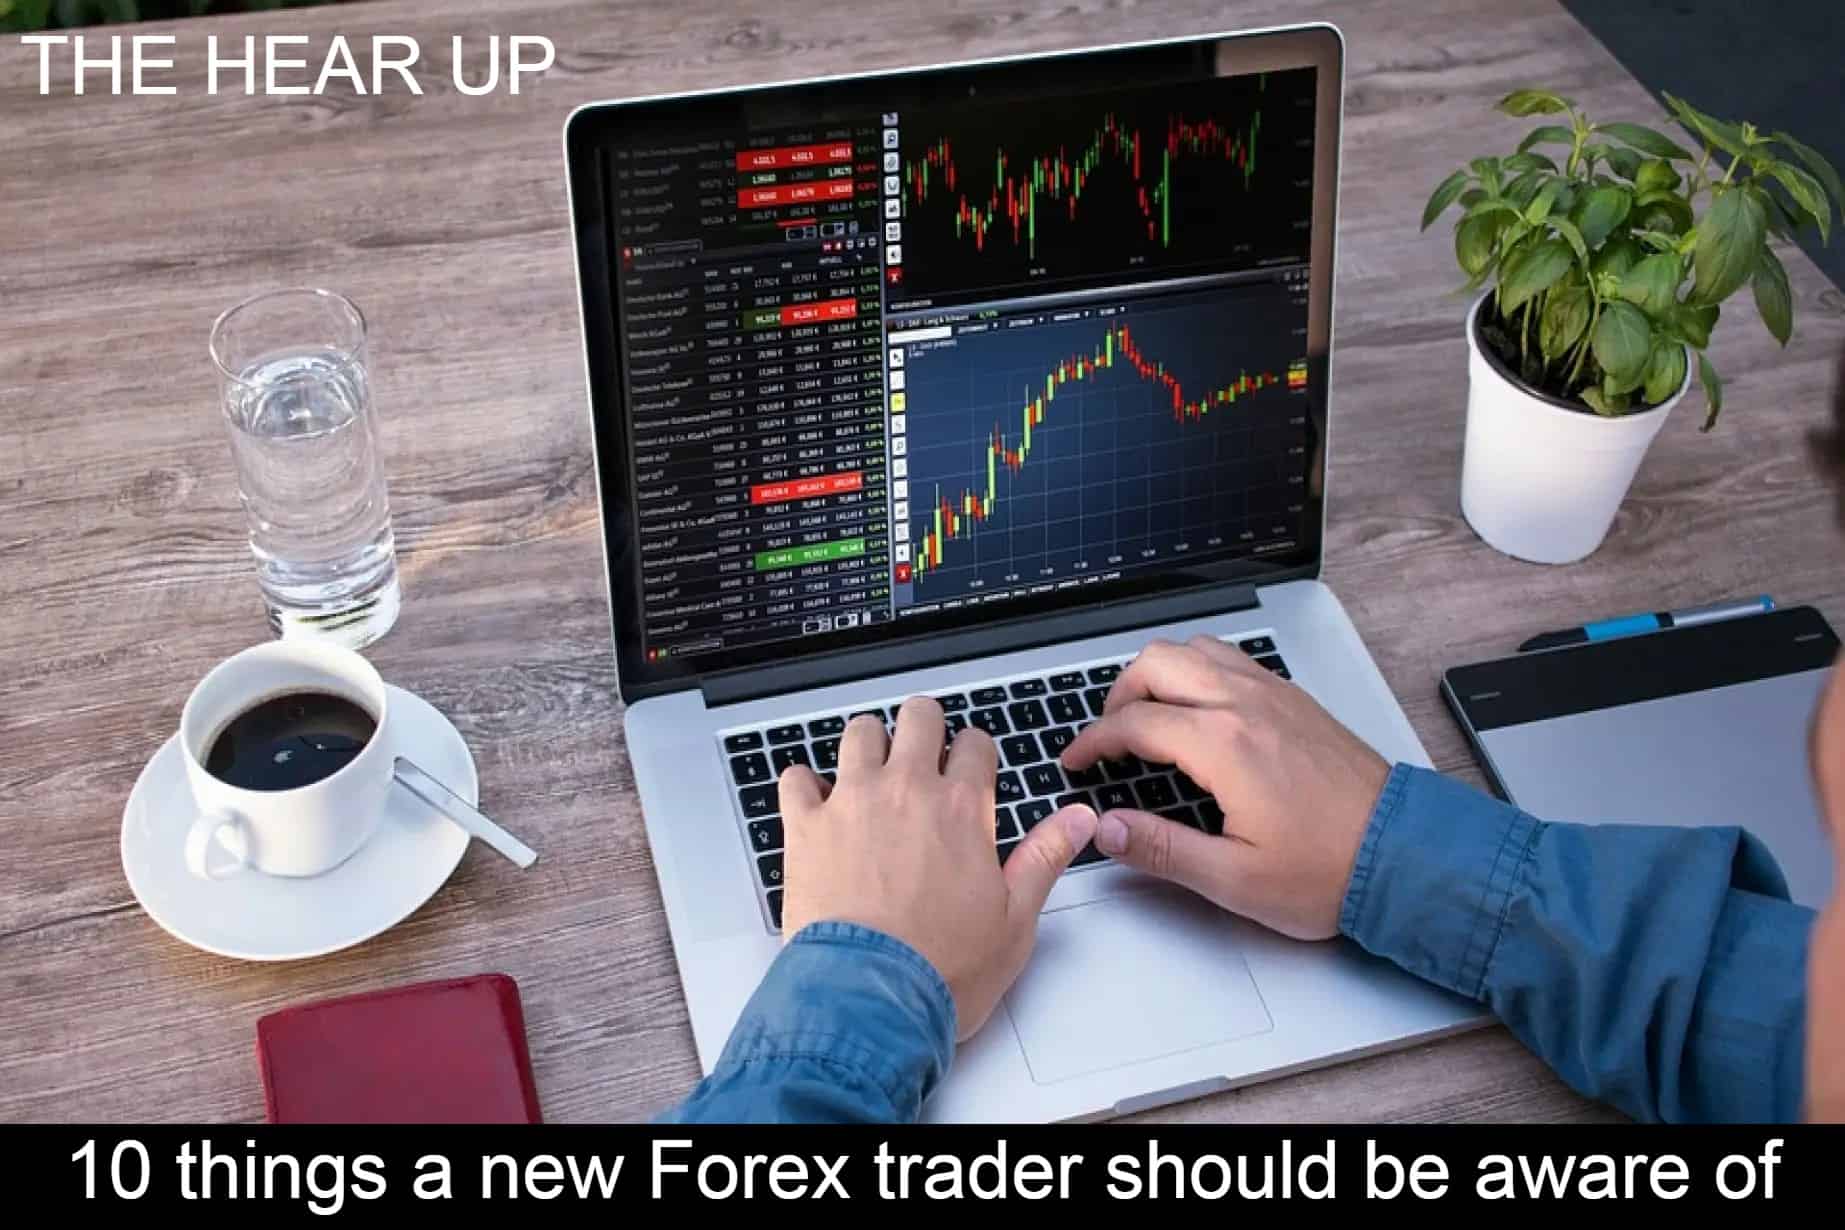 10 things a new Forex trader should be aware of